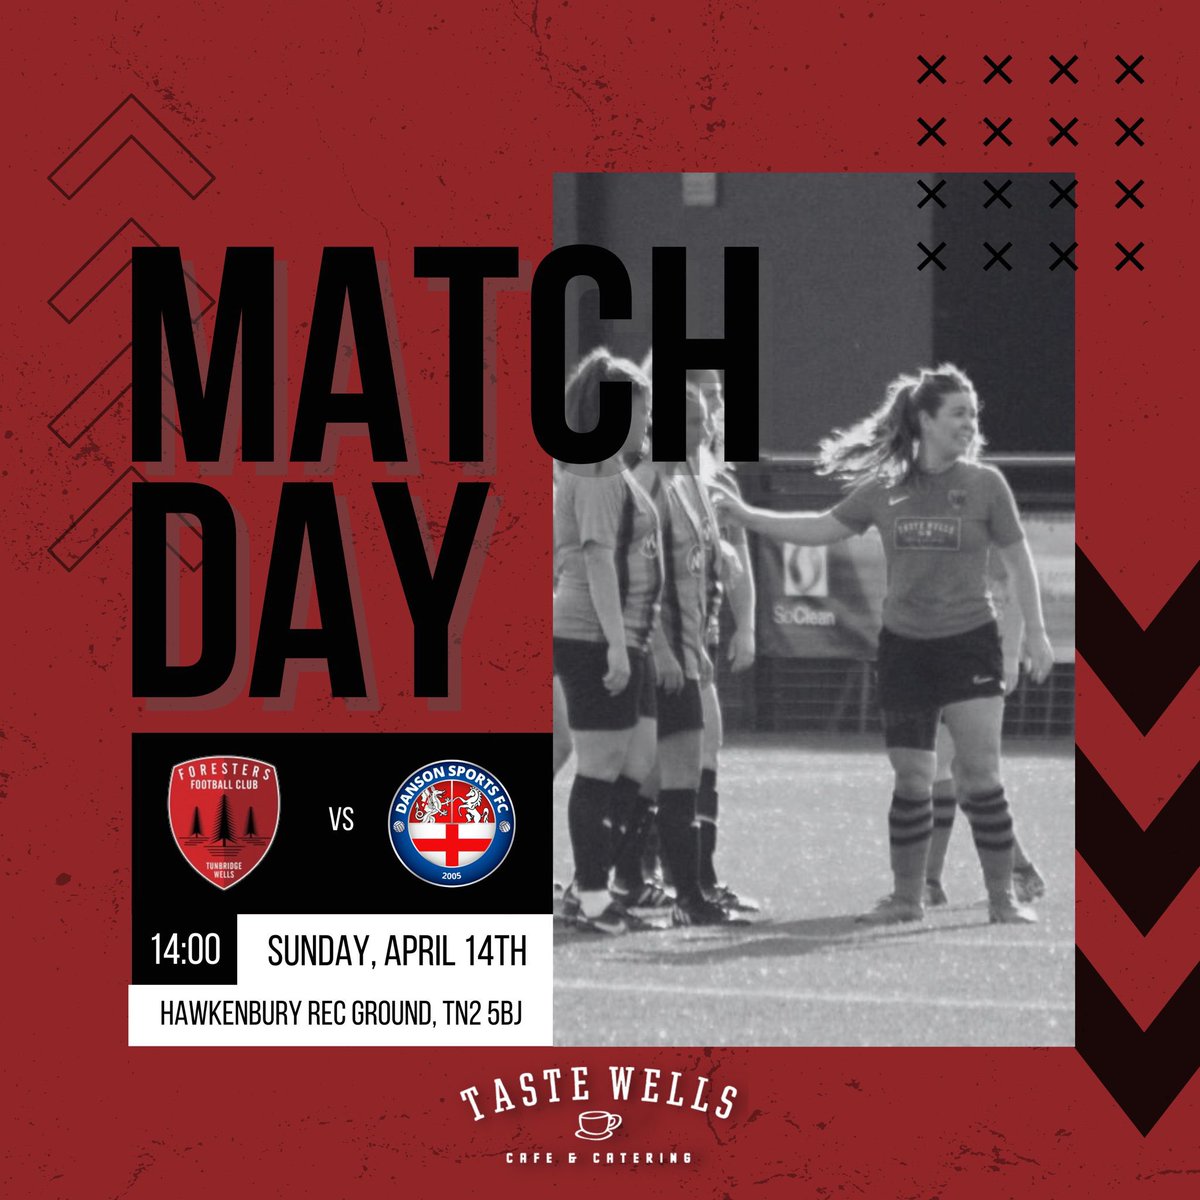 We welcome @DansonSportsFC  today in our latest @SECWFLnews league fixture which should be another great game. 
Your support is always appreciated and hope you can cheer the ladies on today.
#fozzies🟥⬛️ 
@twforesters